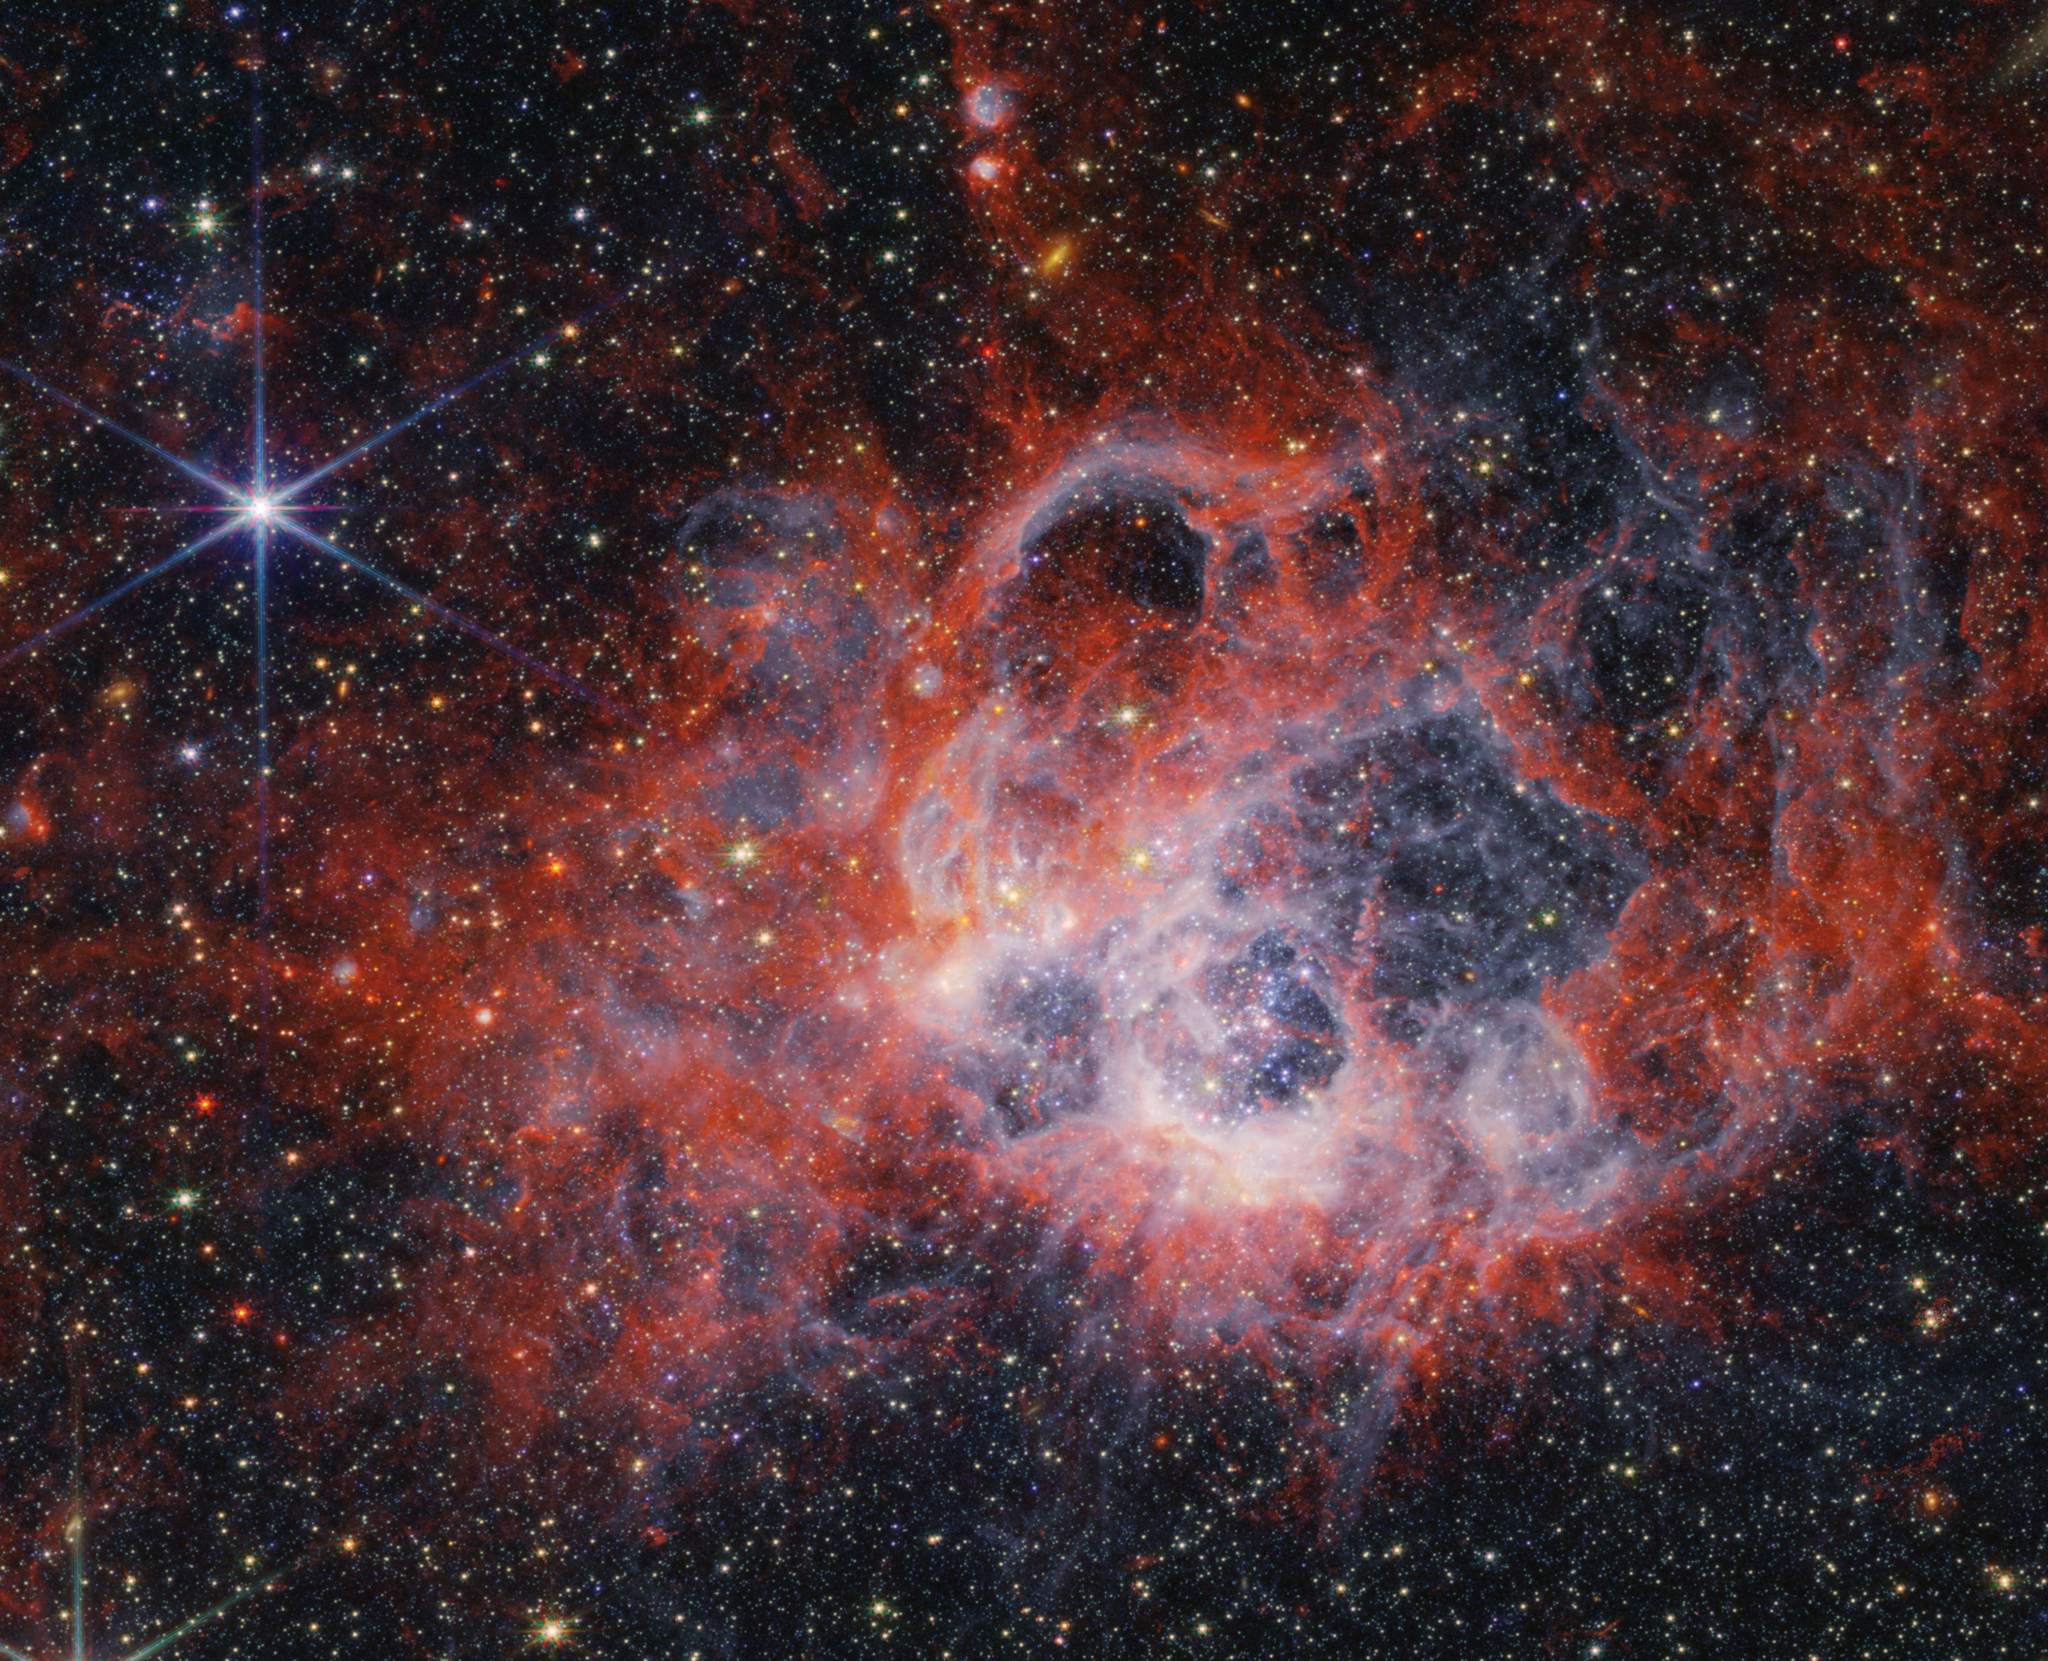 At the center of the image is a nebula on the black background of space. The nebula is comprised of clumpy, red, filamentary clouds. At the center-right of the red clouds is a large cavernous bubble, and at the center of the bubble there is an opaque blueish glow with speckles of stars. At the edges of the bubble, the dust is white. There are several other smaller cavernous bubbles at the top of the nebula, including two tiny cavities at the top center of the image. There are thousands of stars that fill the surrounding area outside the nebula, most of them are yellow or white. At 11 o'clock and 6 o'clock there are extremely bright stars with 8 diffraction spikes. There are also some smaller, red stars and a few disk-shaped galaxies scattered across the image.